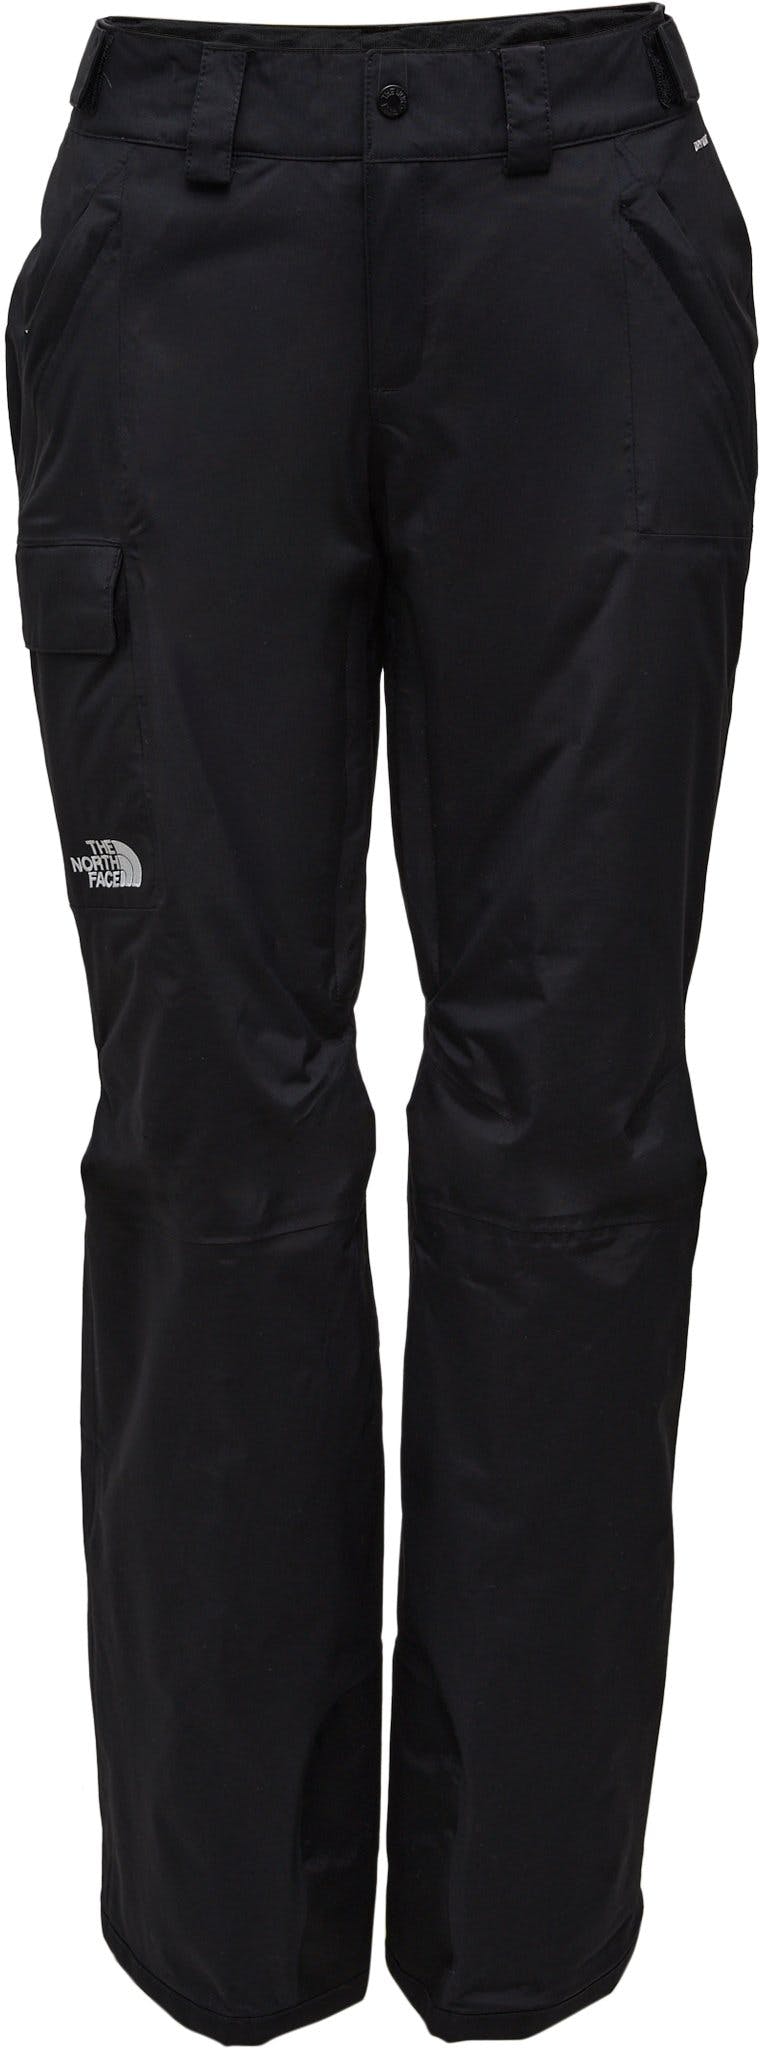 Product image for Freedom Insulated Pants - Women's